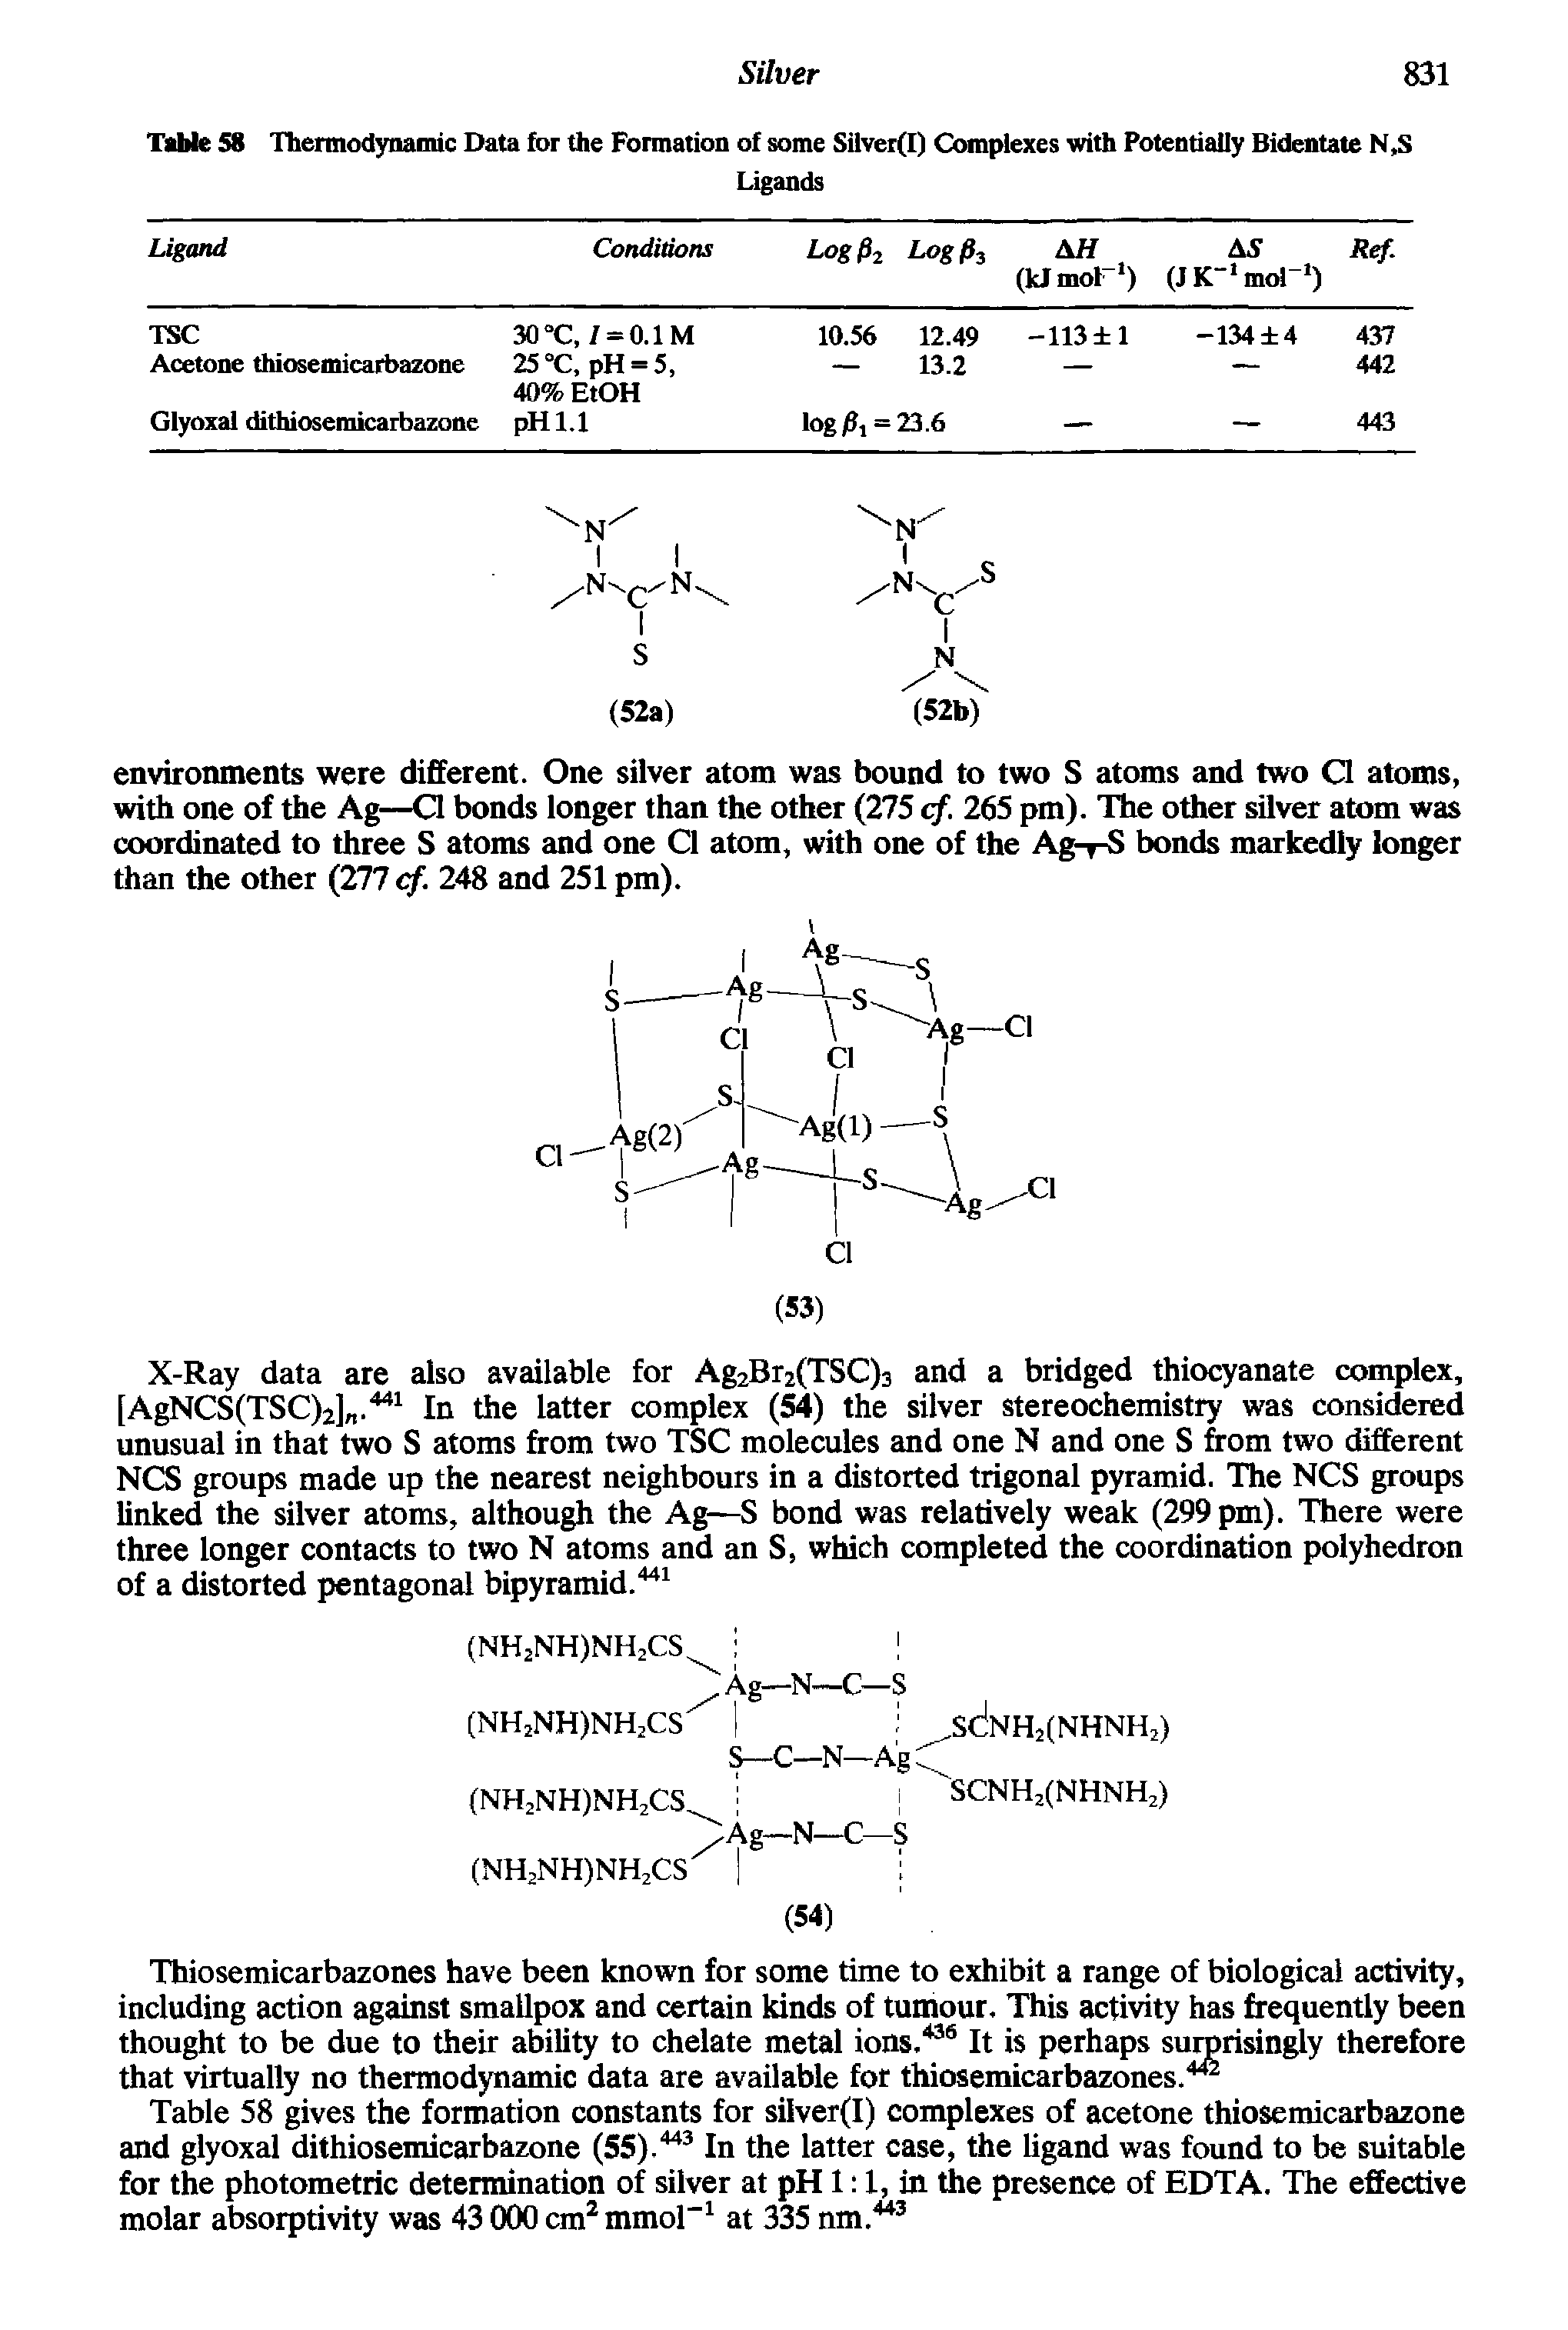 Table 58 Thermodynamic Data for the Formation of some Silver(l) Complexes with Potentially Bidentate N.S...